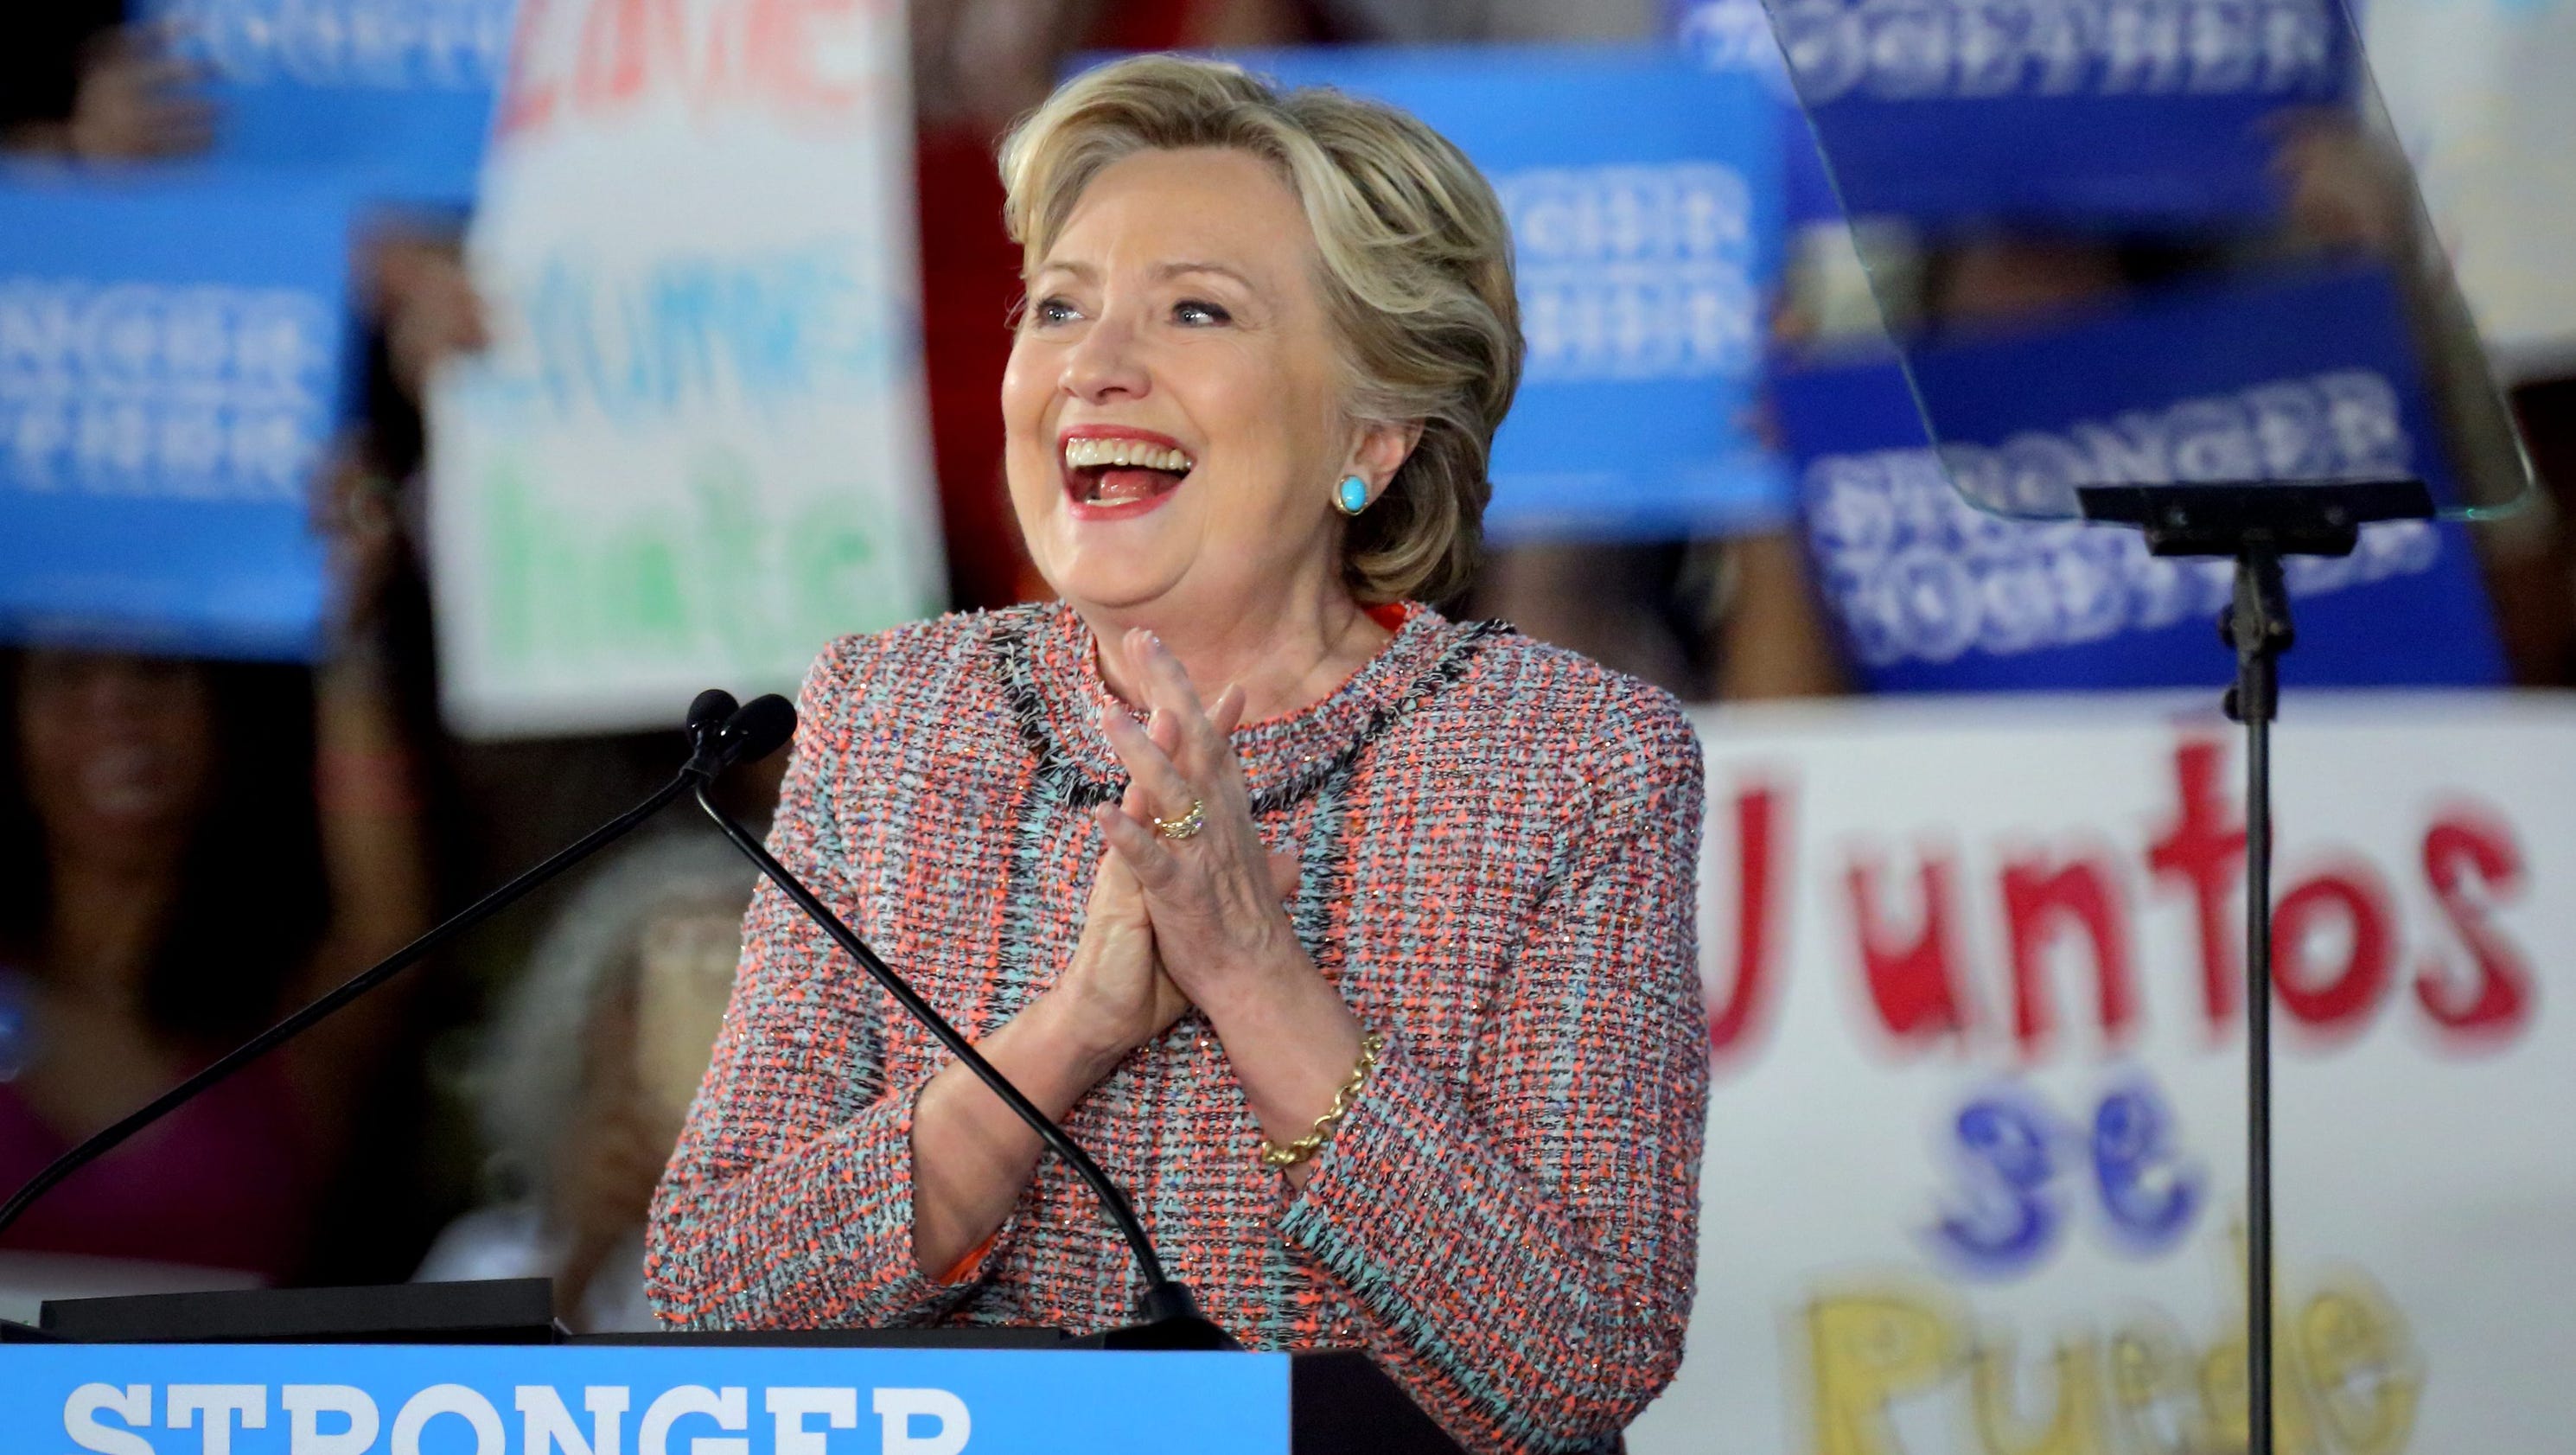 Hillary Clinton tries to woo reluctant Florida millennials